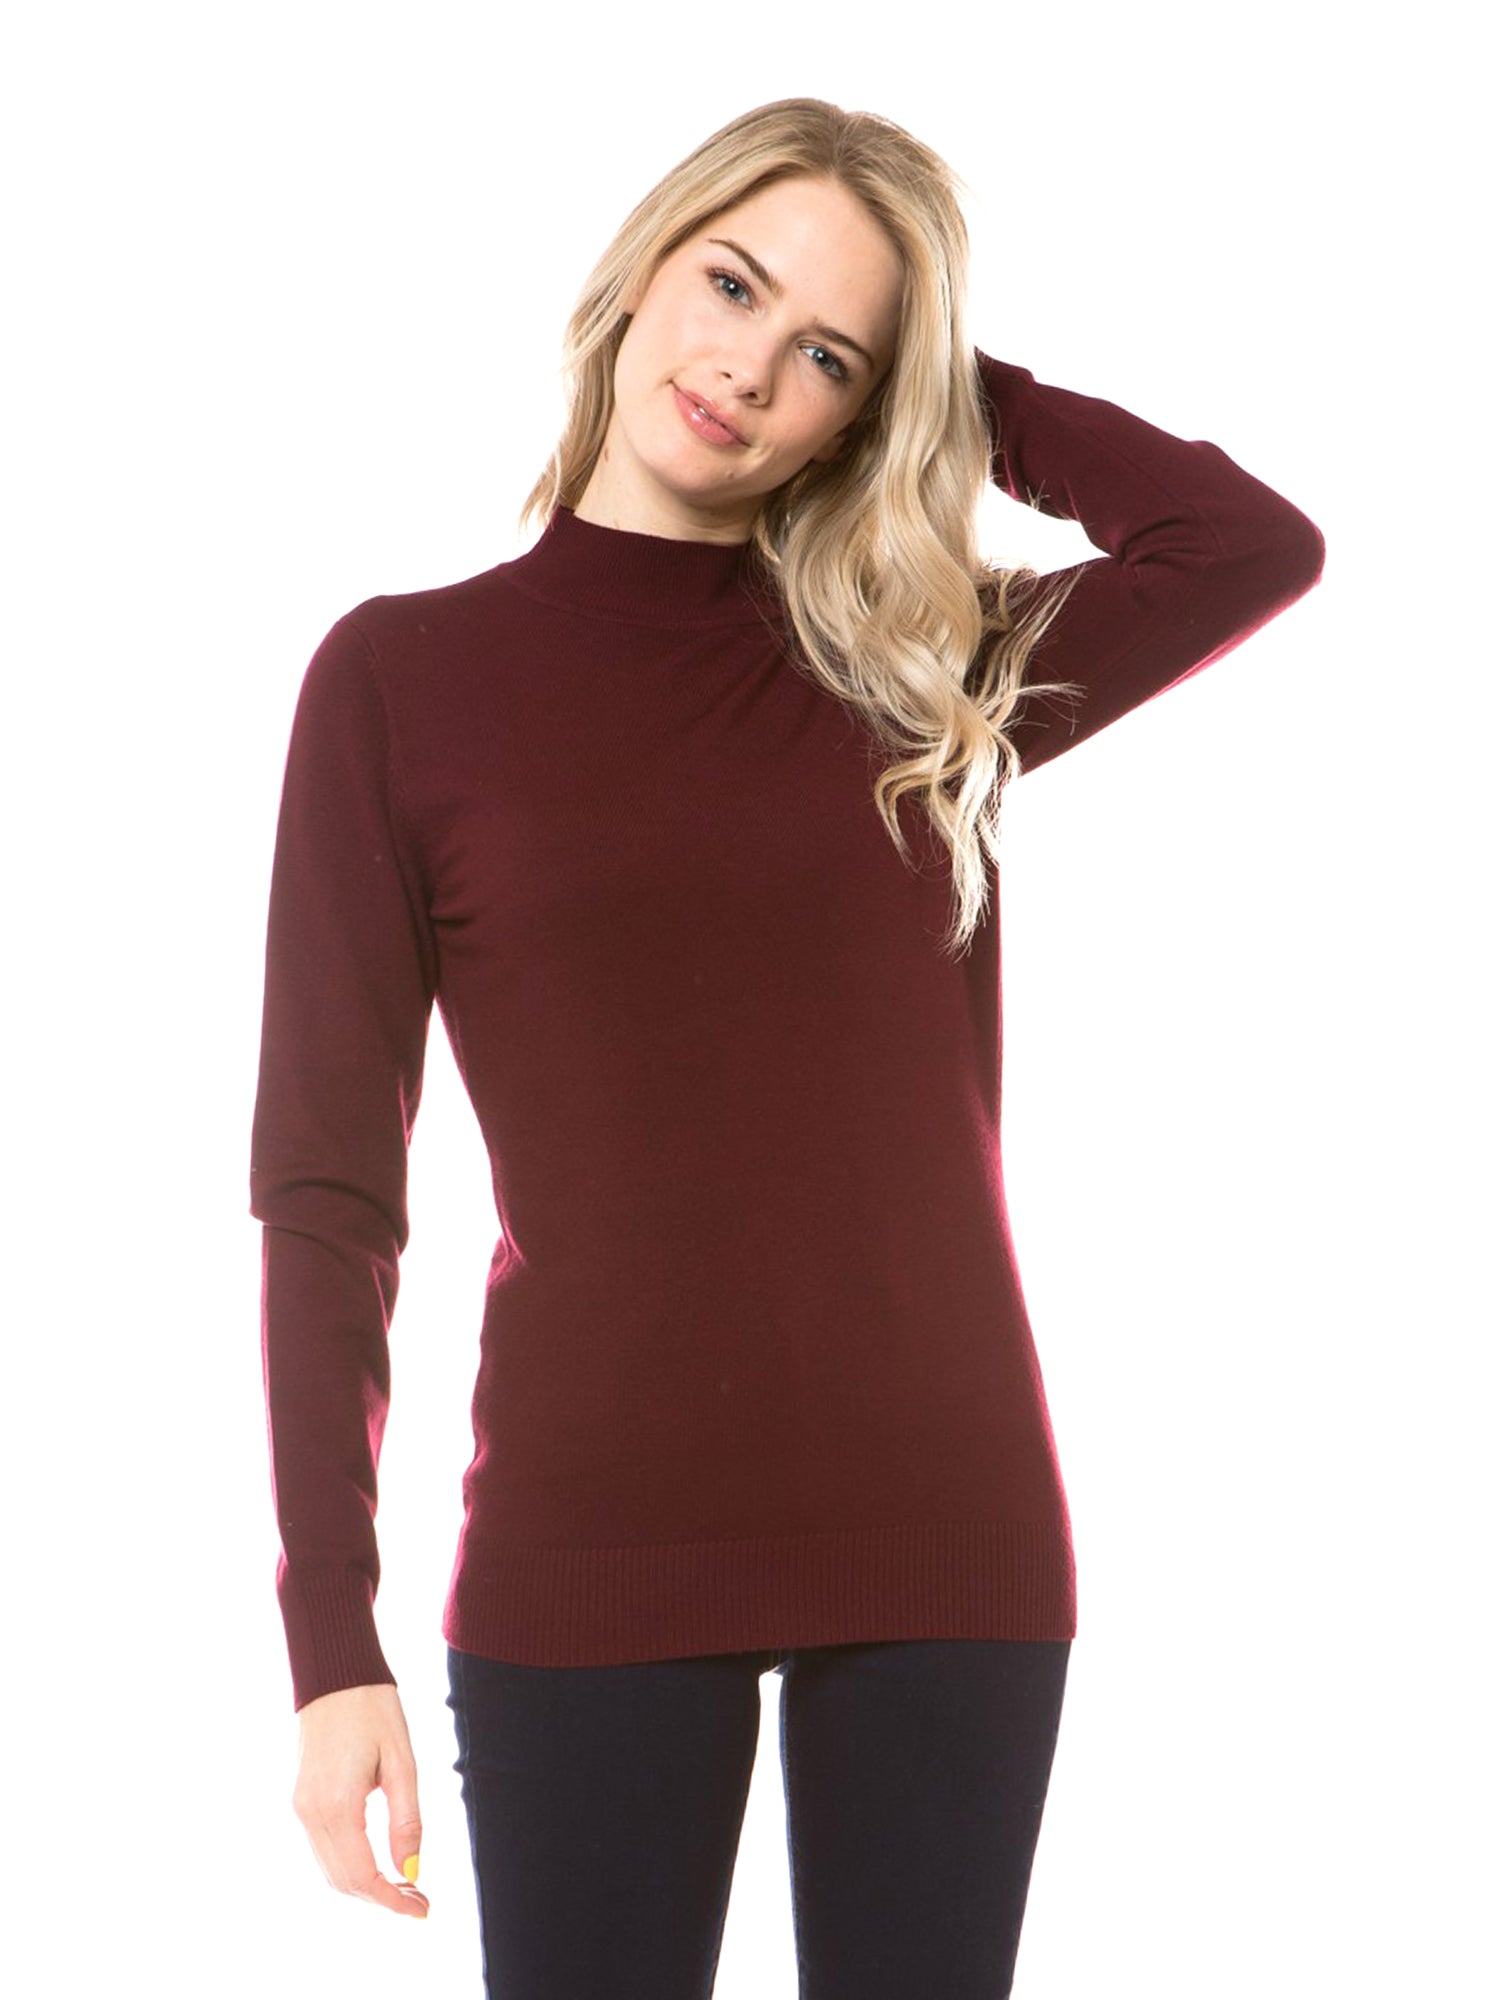 Cielo Mock Neck Knit Pull Over Sweater - Sweater